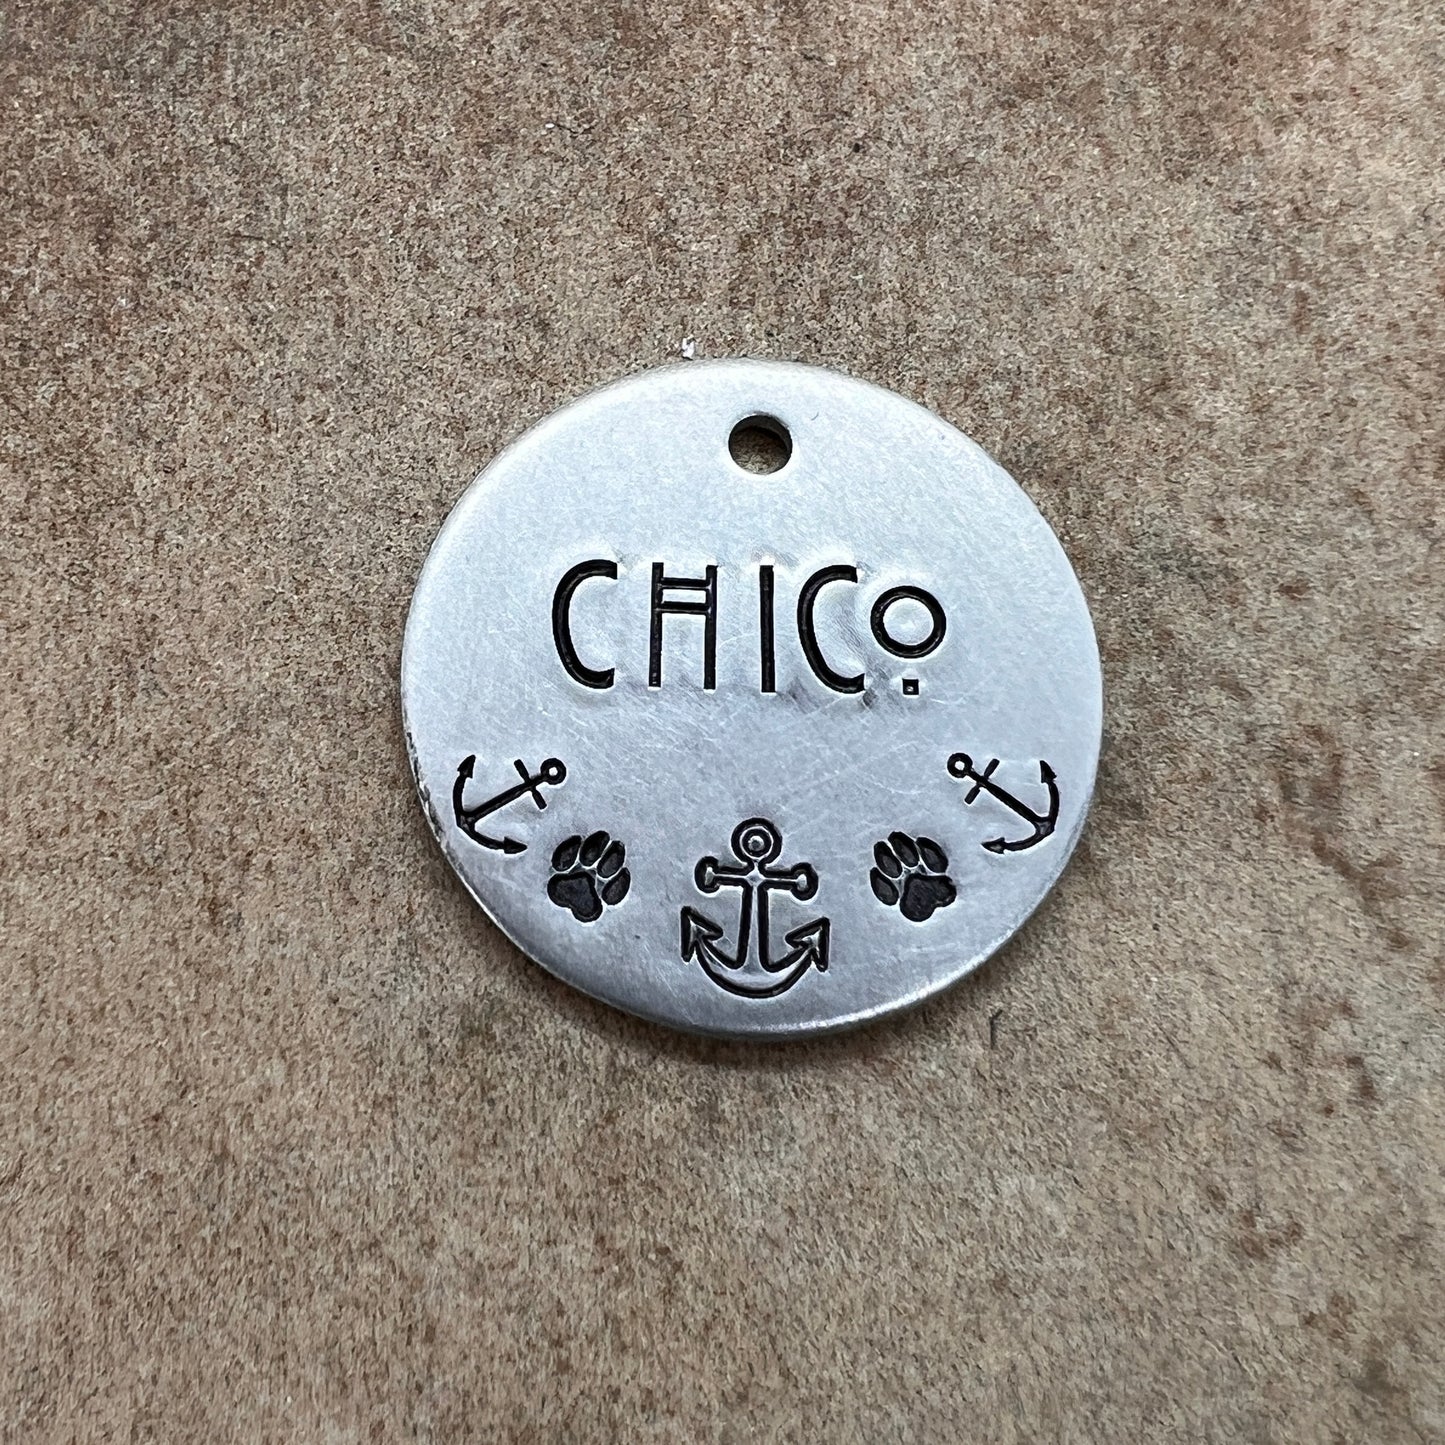 ELEMENTS design your own pet tag • Round 25mm